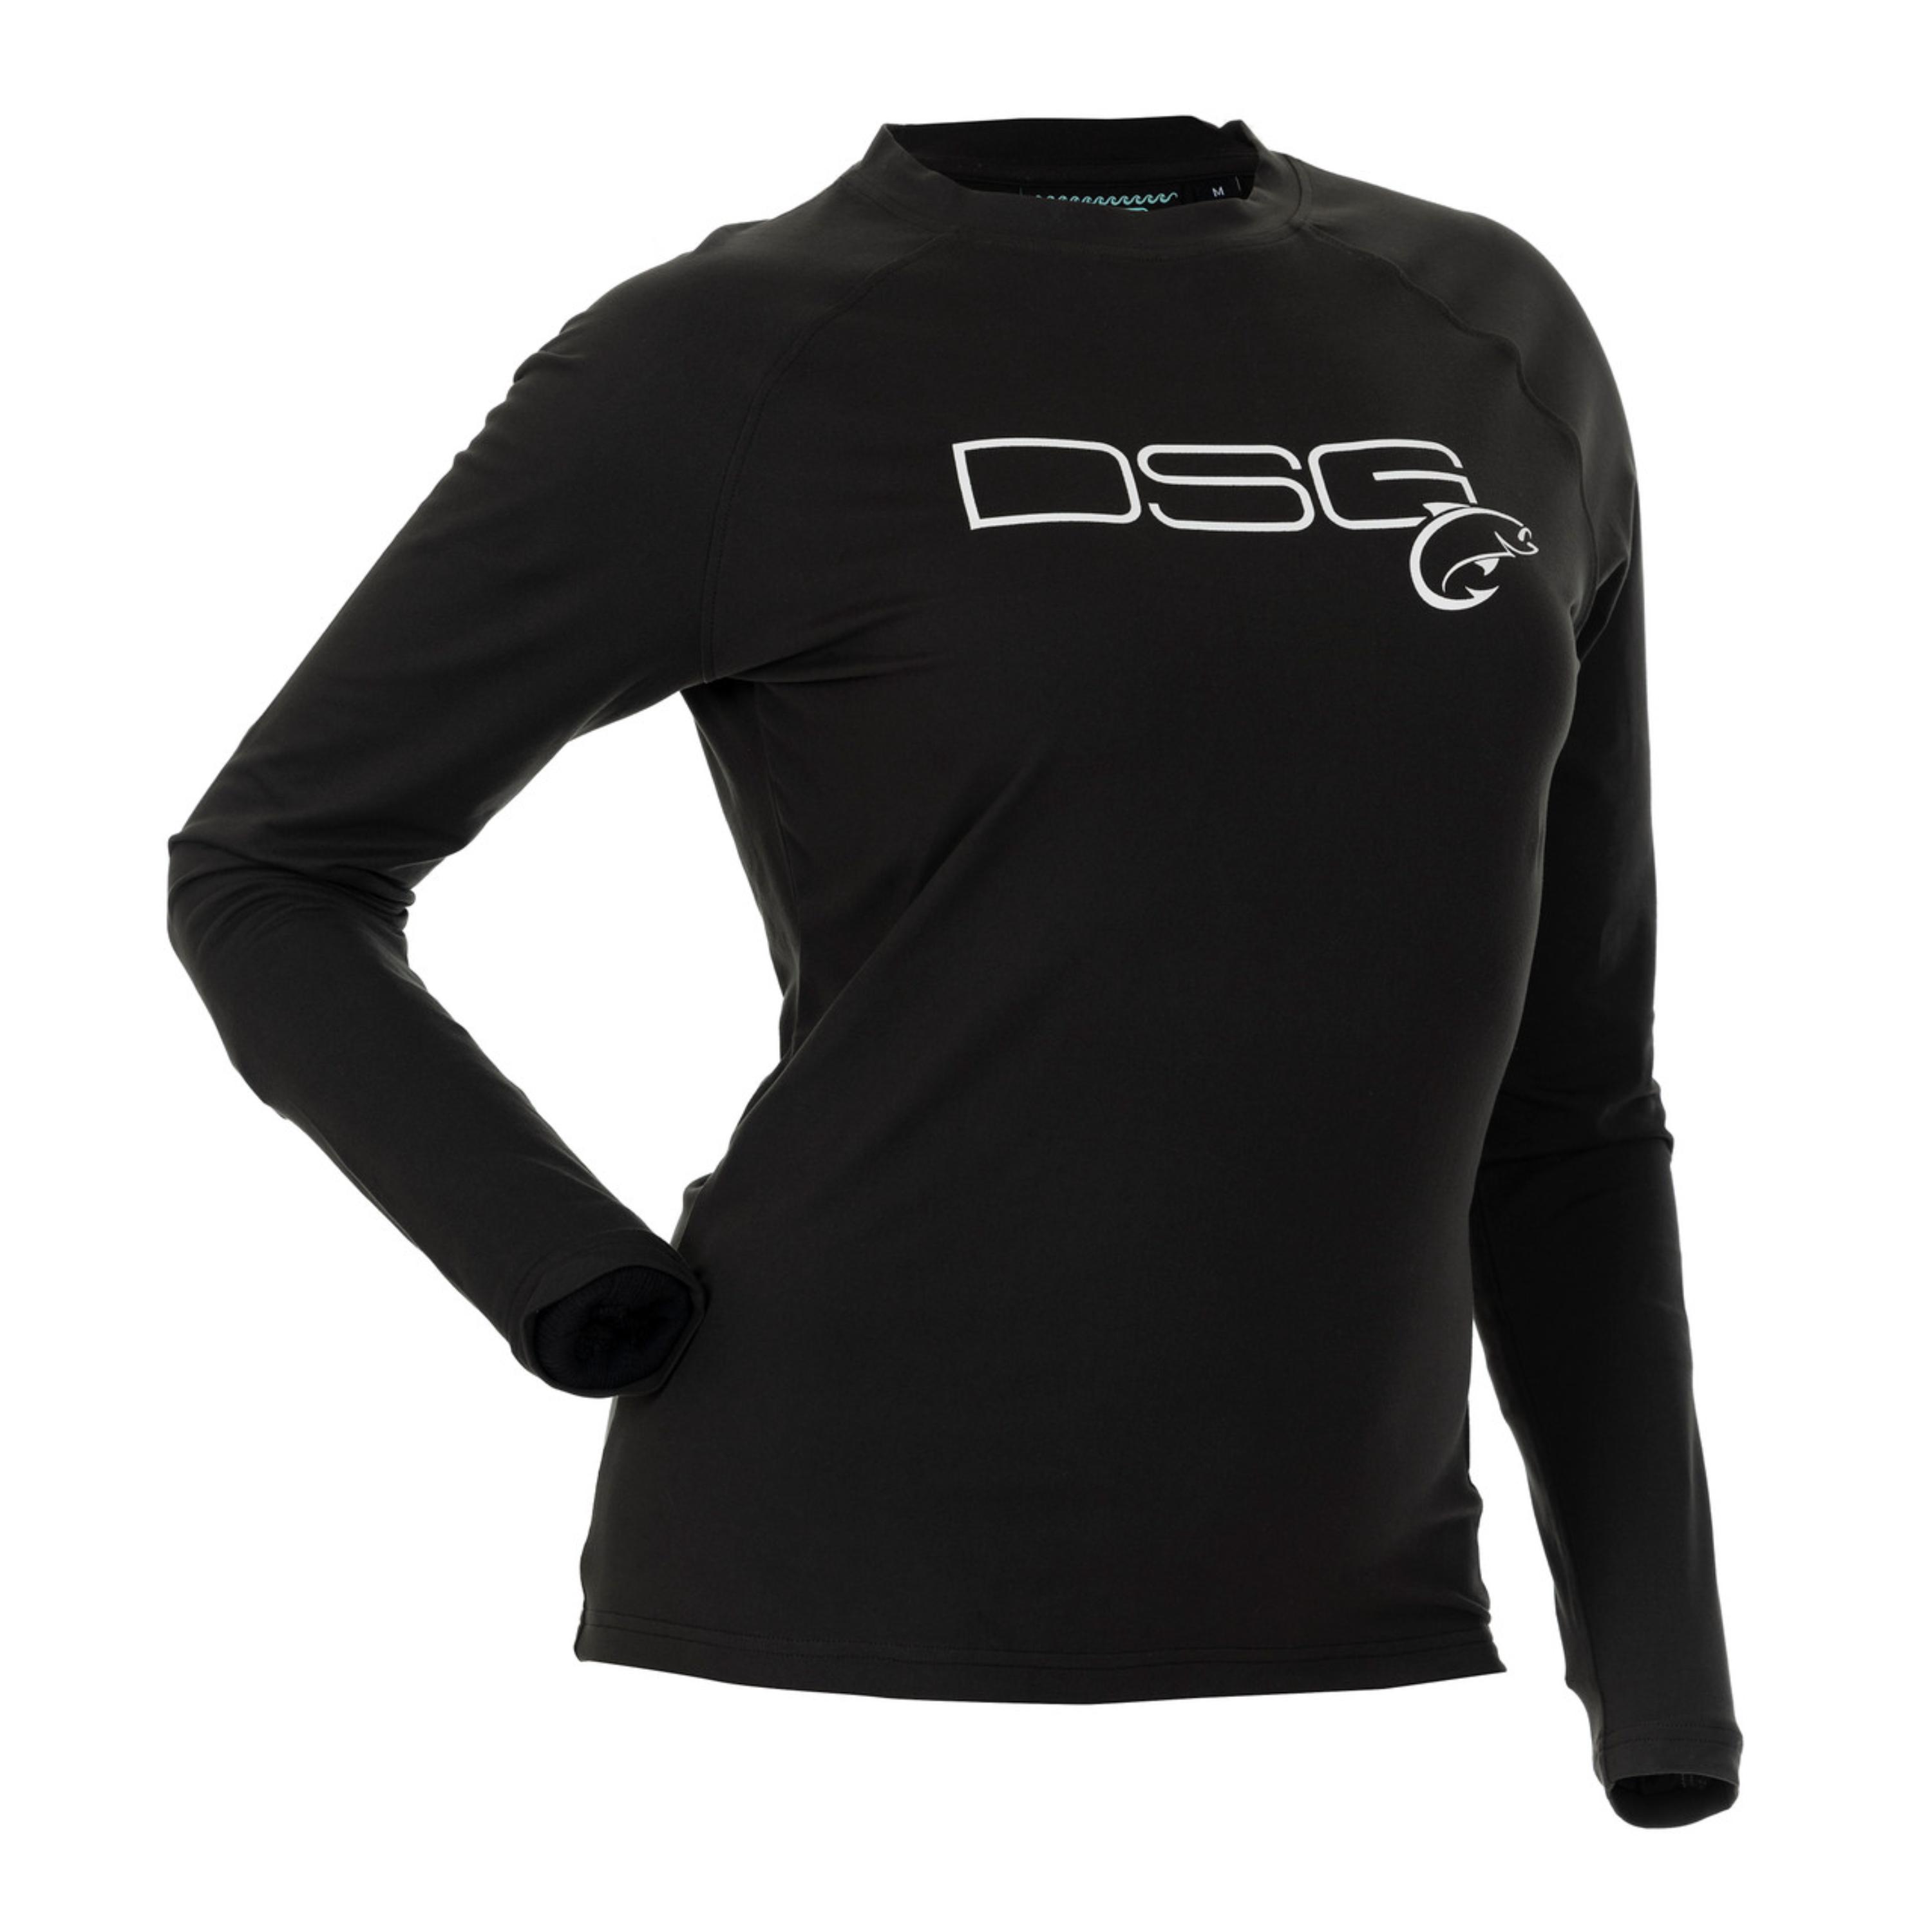 DSG OUTERWEAR Women's Clothing & Outerwear, Clothing